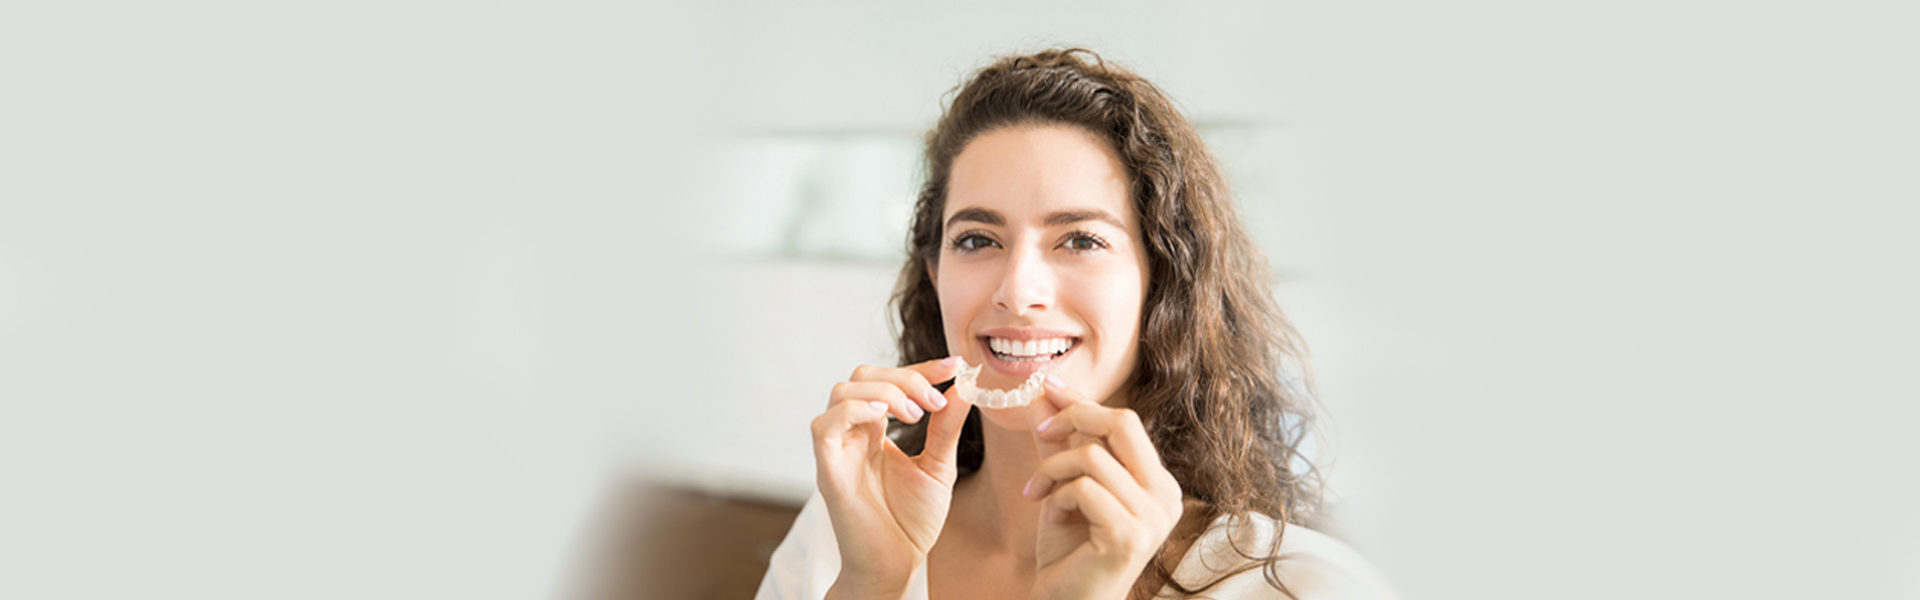 7 Commonly Asked Questions about Invisalign Clear Aligners